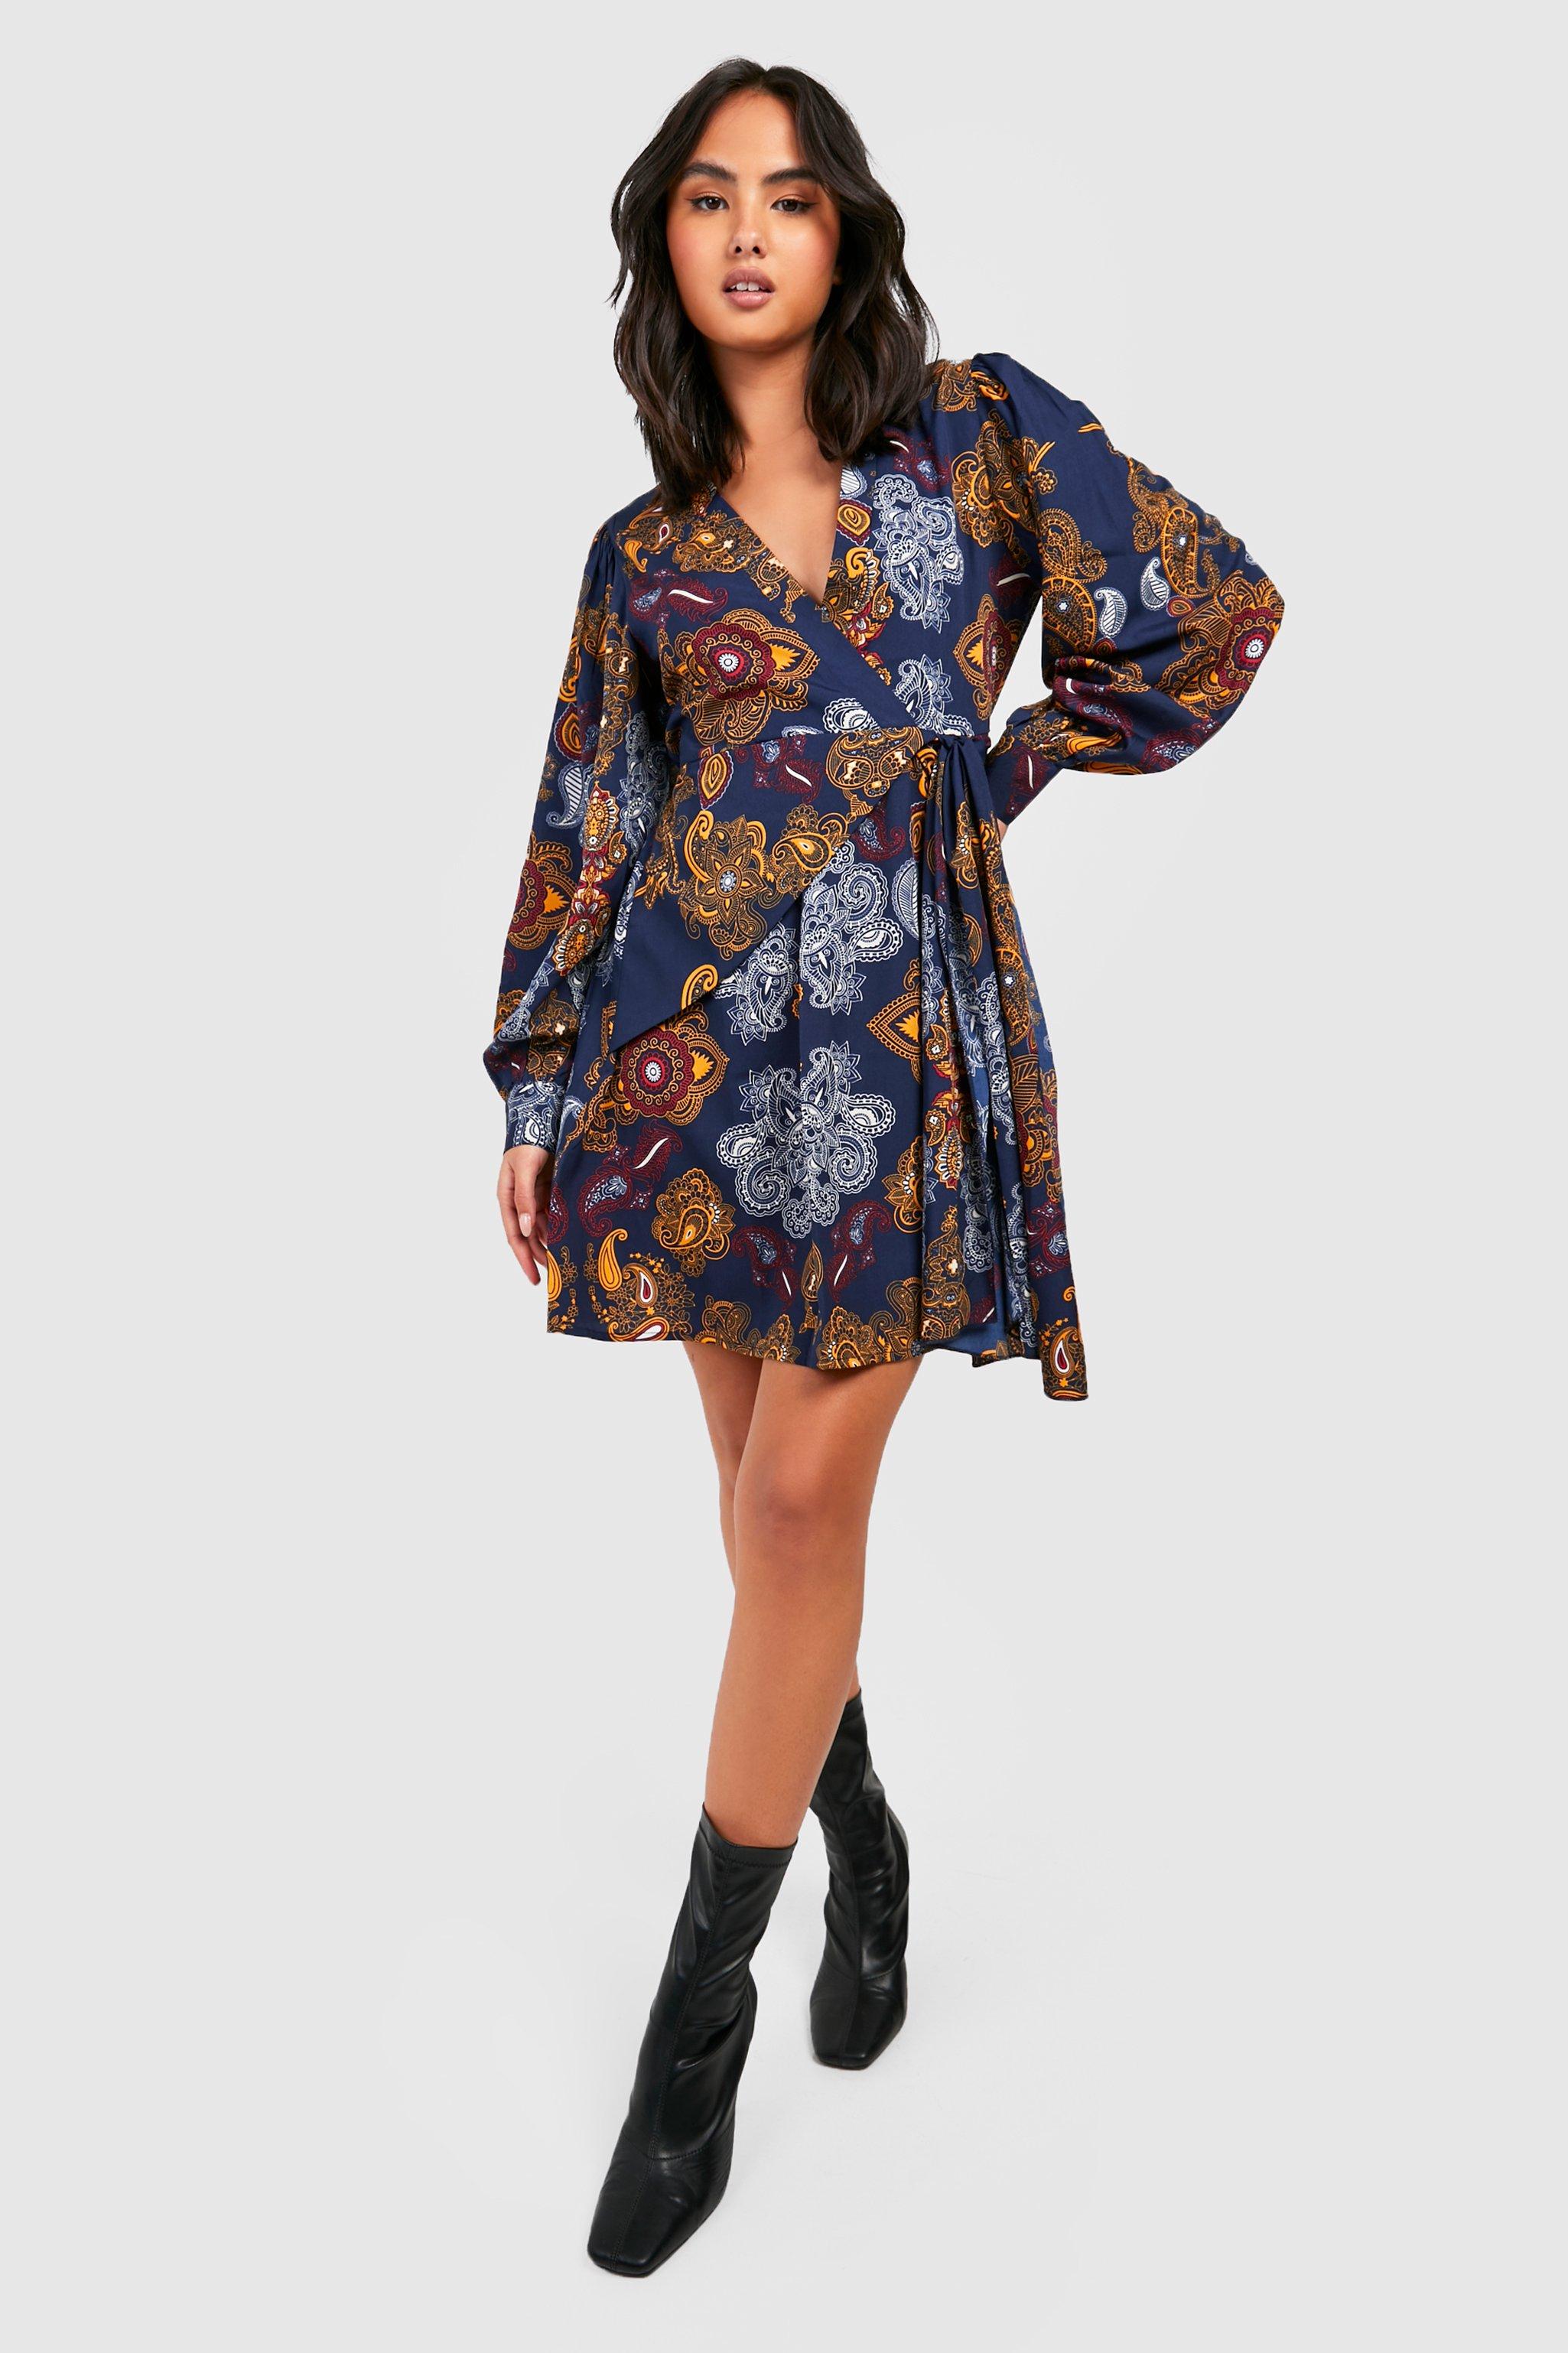 boohoo Women's The Printed Skater Dress|Size: 8|navy